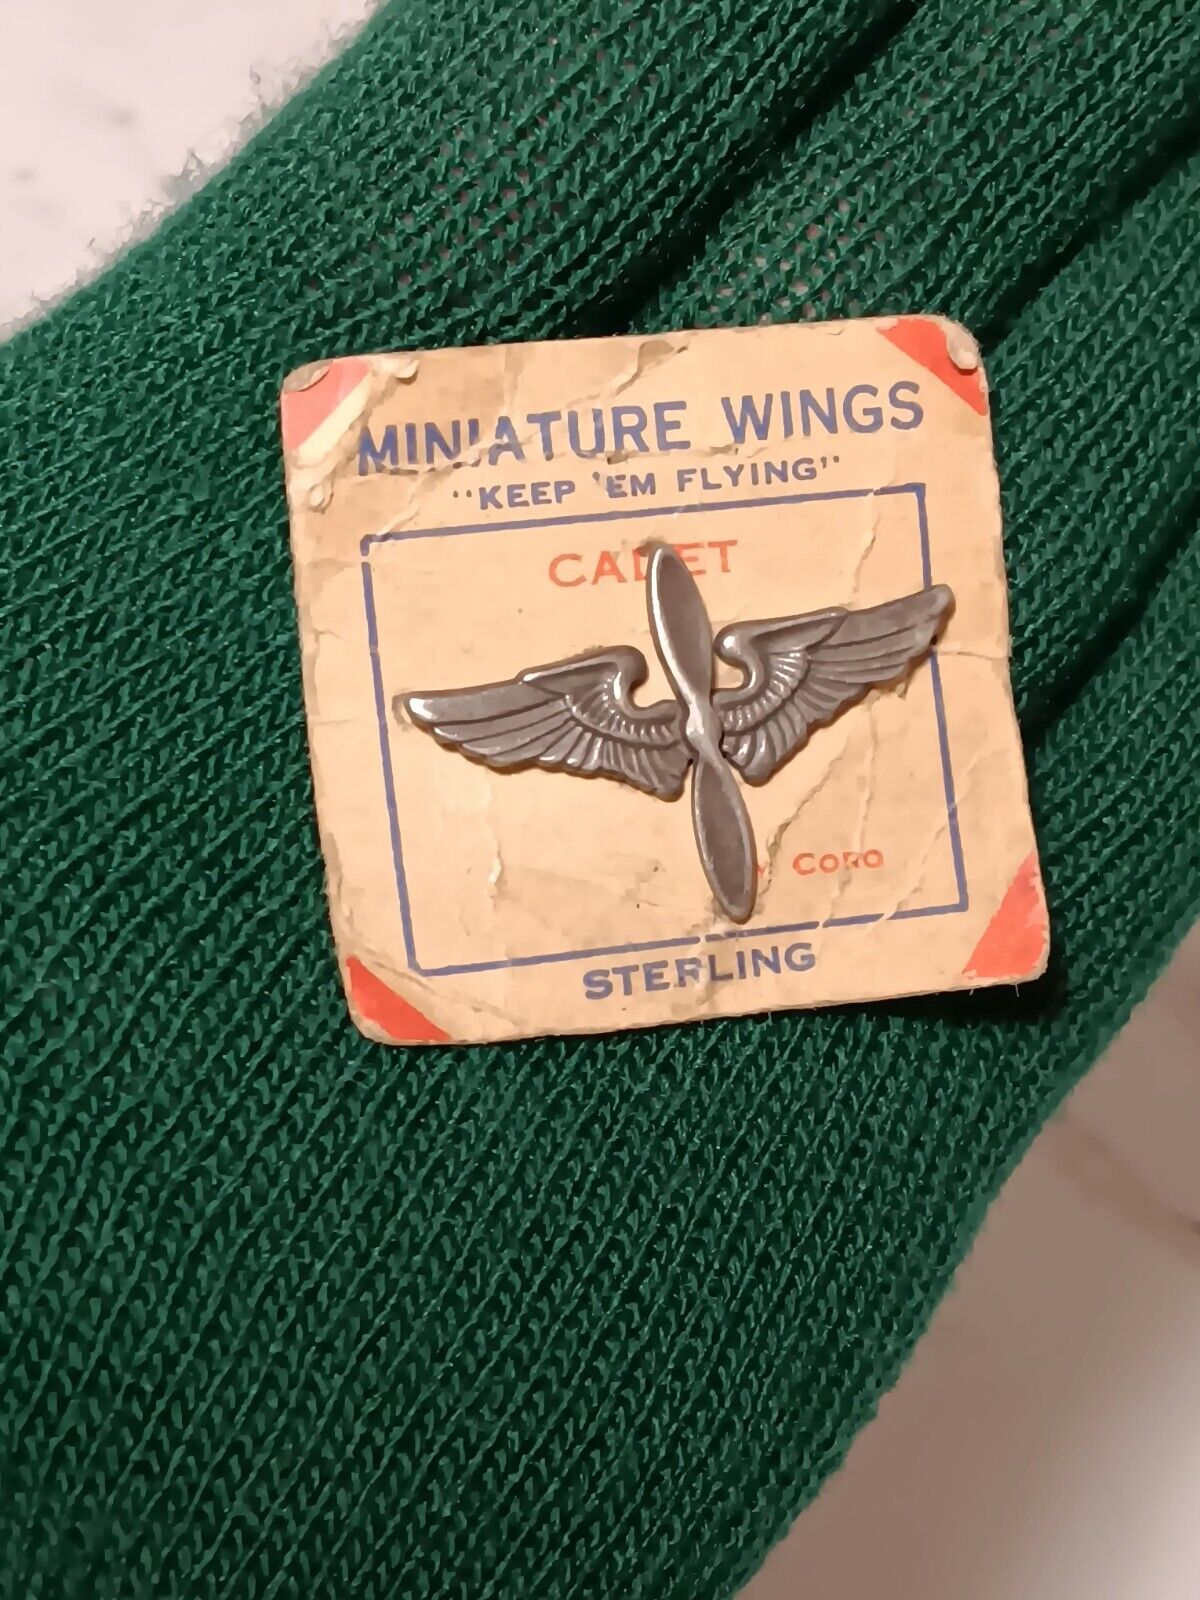 NOS Sterling Silver US Military Miniature Cadet Pilot Wings Vintage New